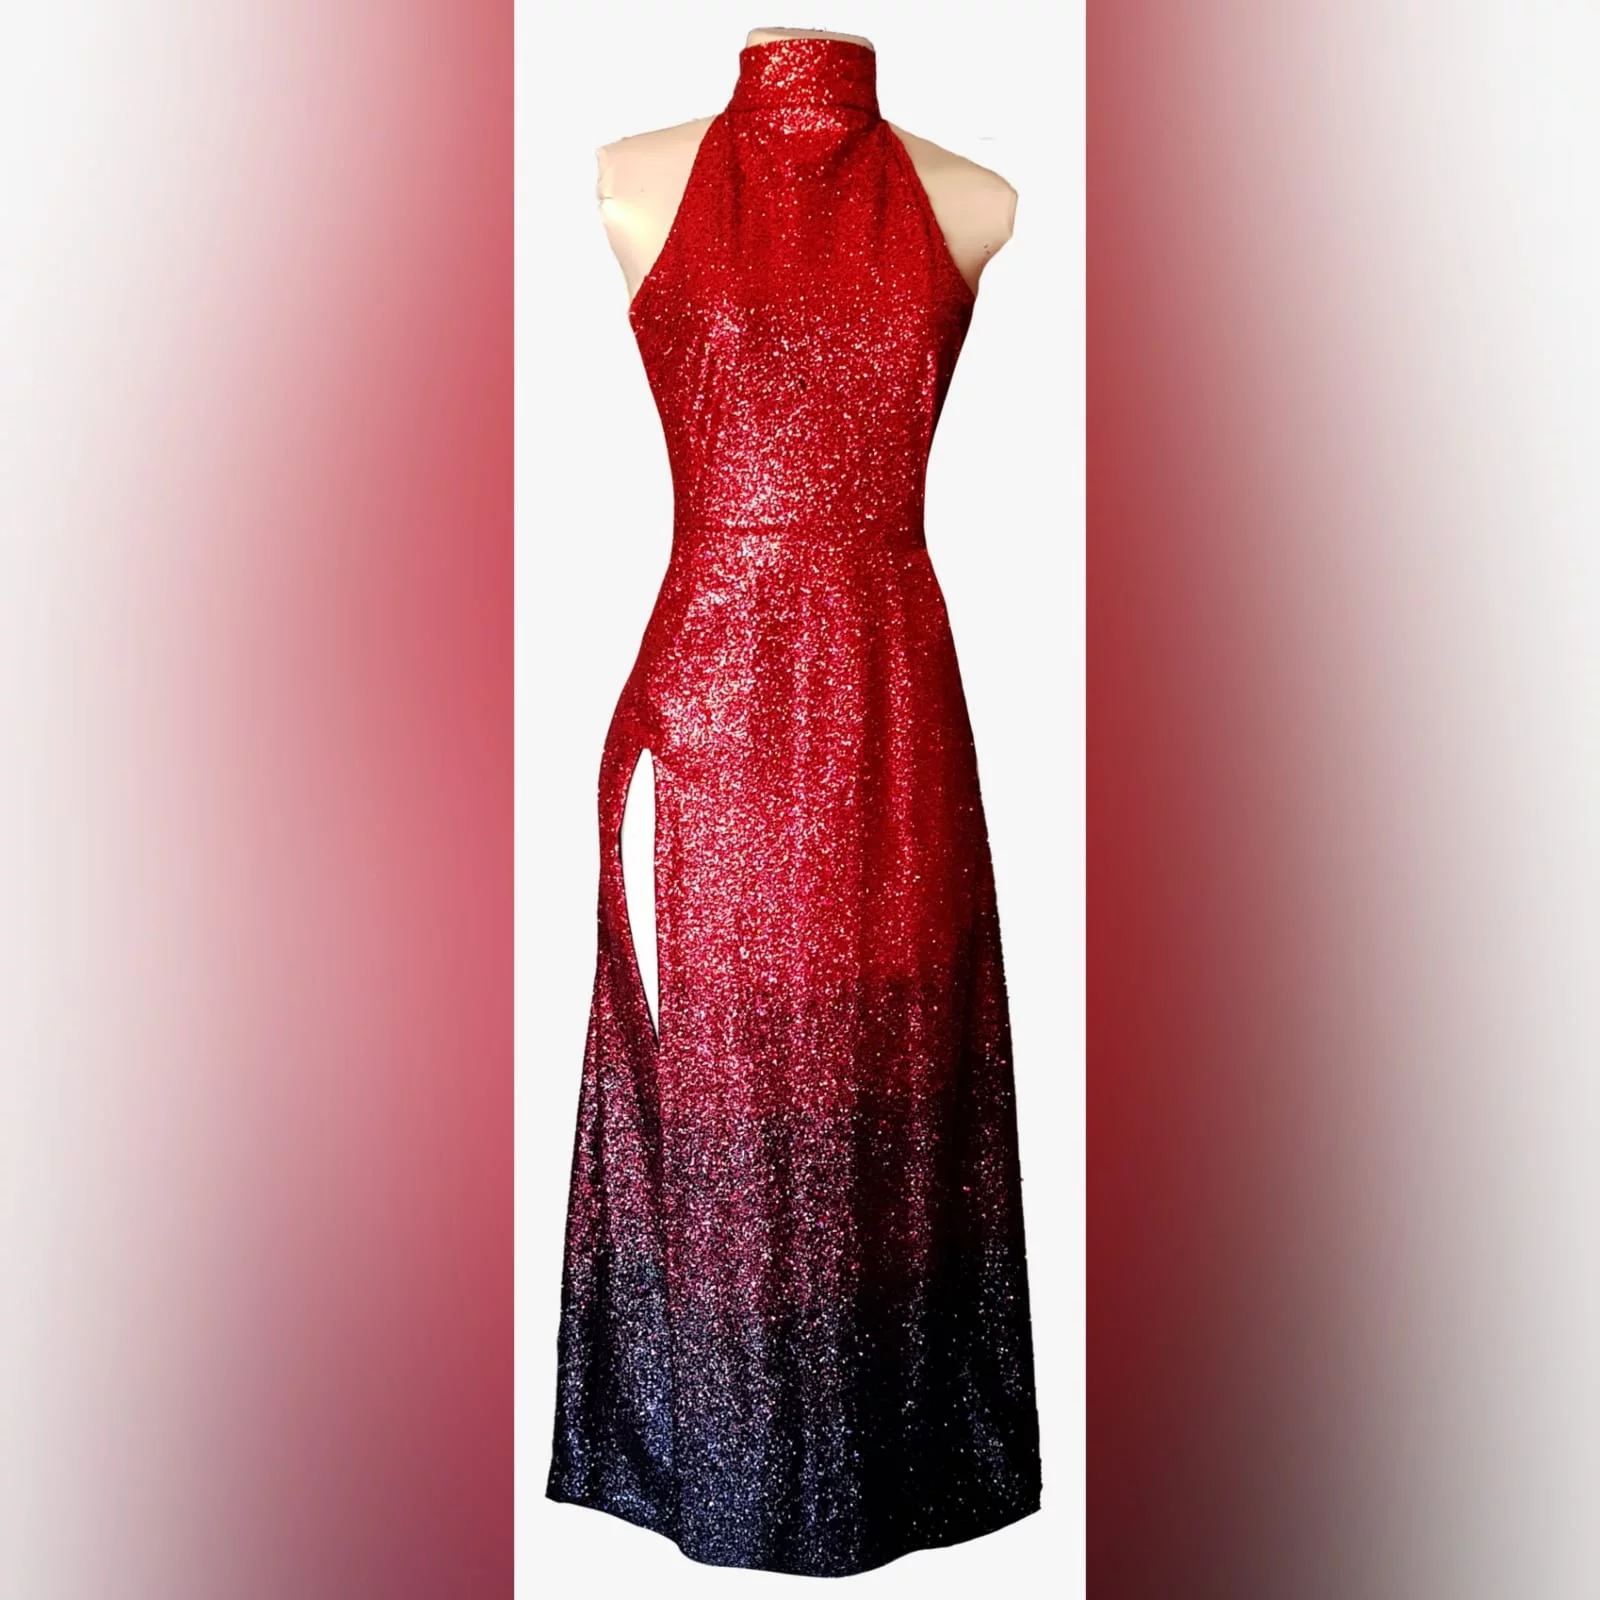 Glittered red and black ombre evening dress 11 want to be the shine at your prom gala? Wear a stunning fully glitter red and black ombre evening dress. With a high slit for a touch of sexy to your radical look.